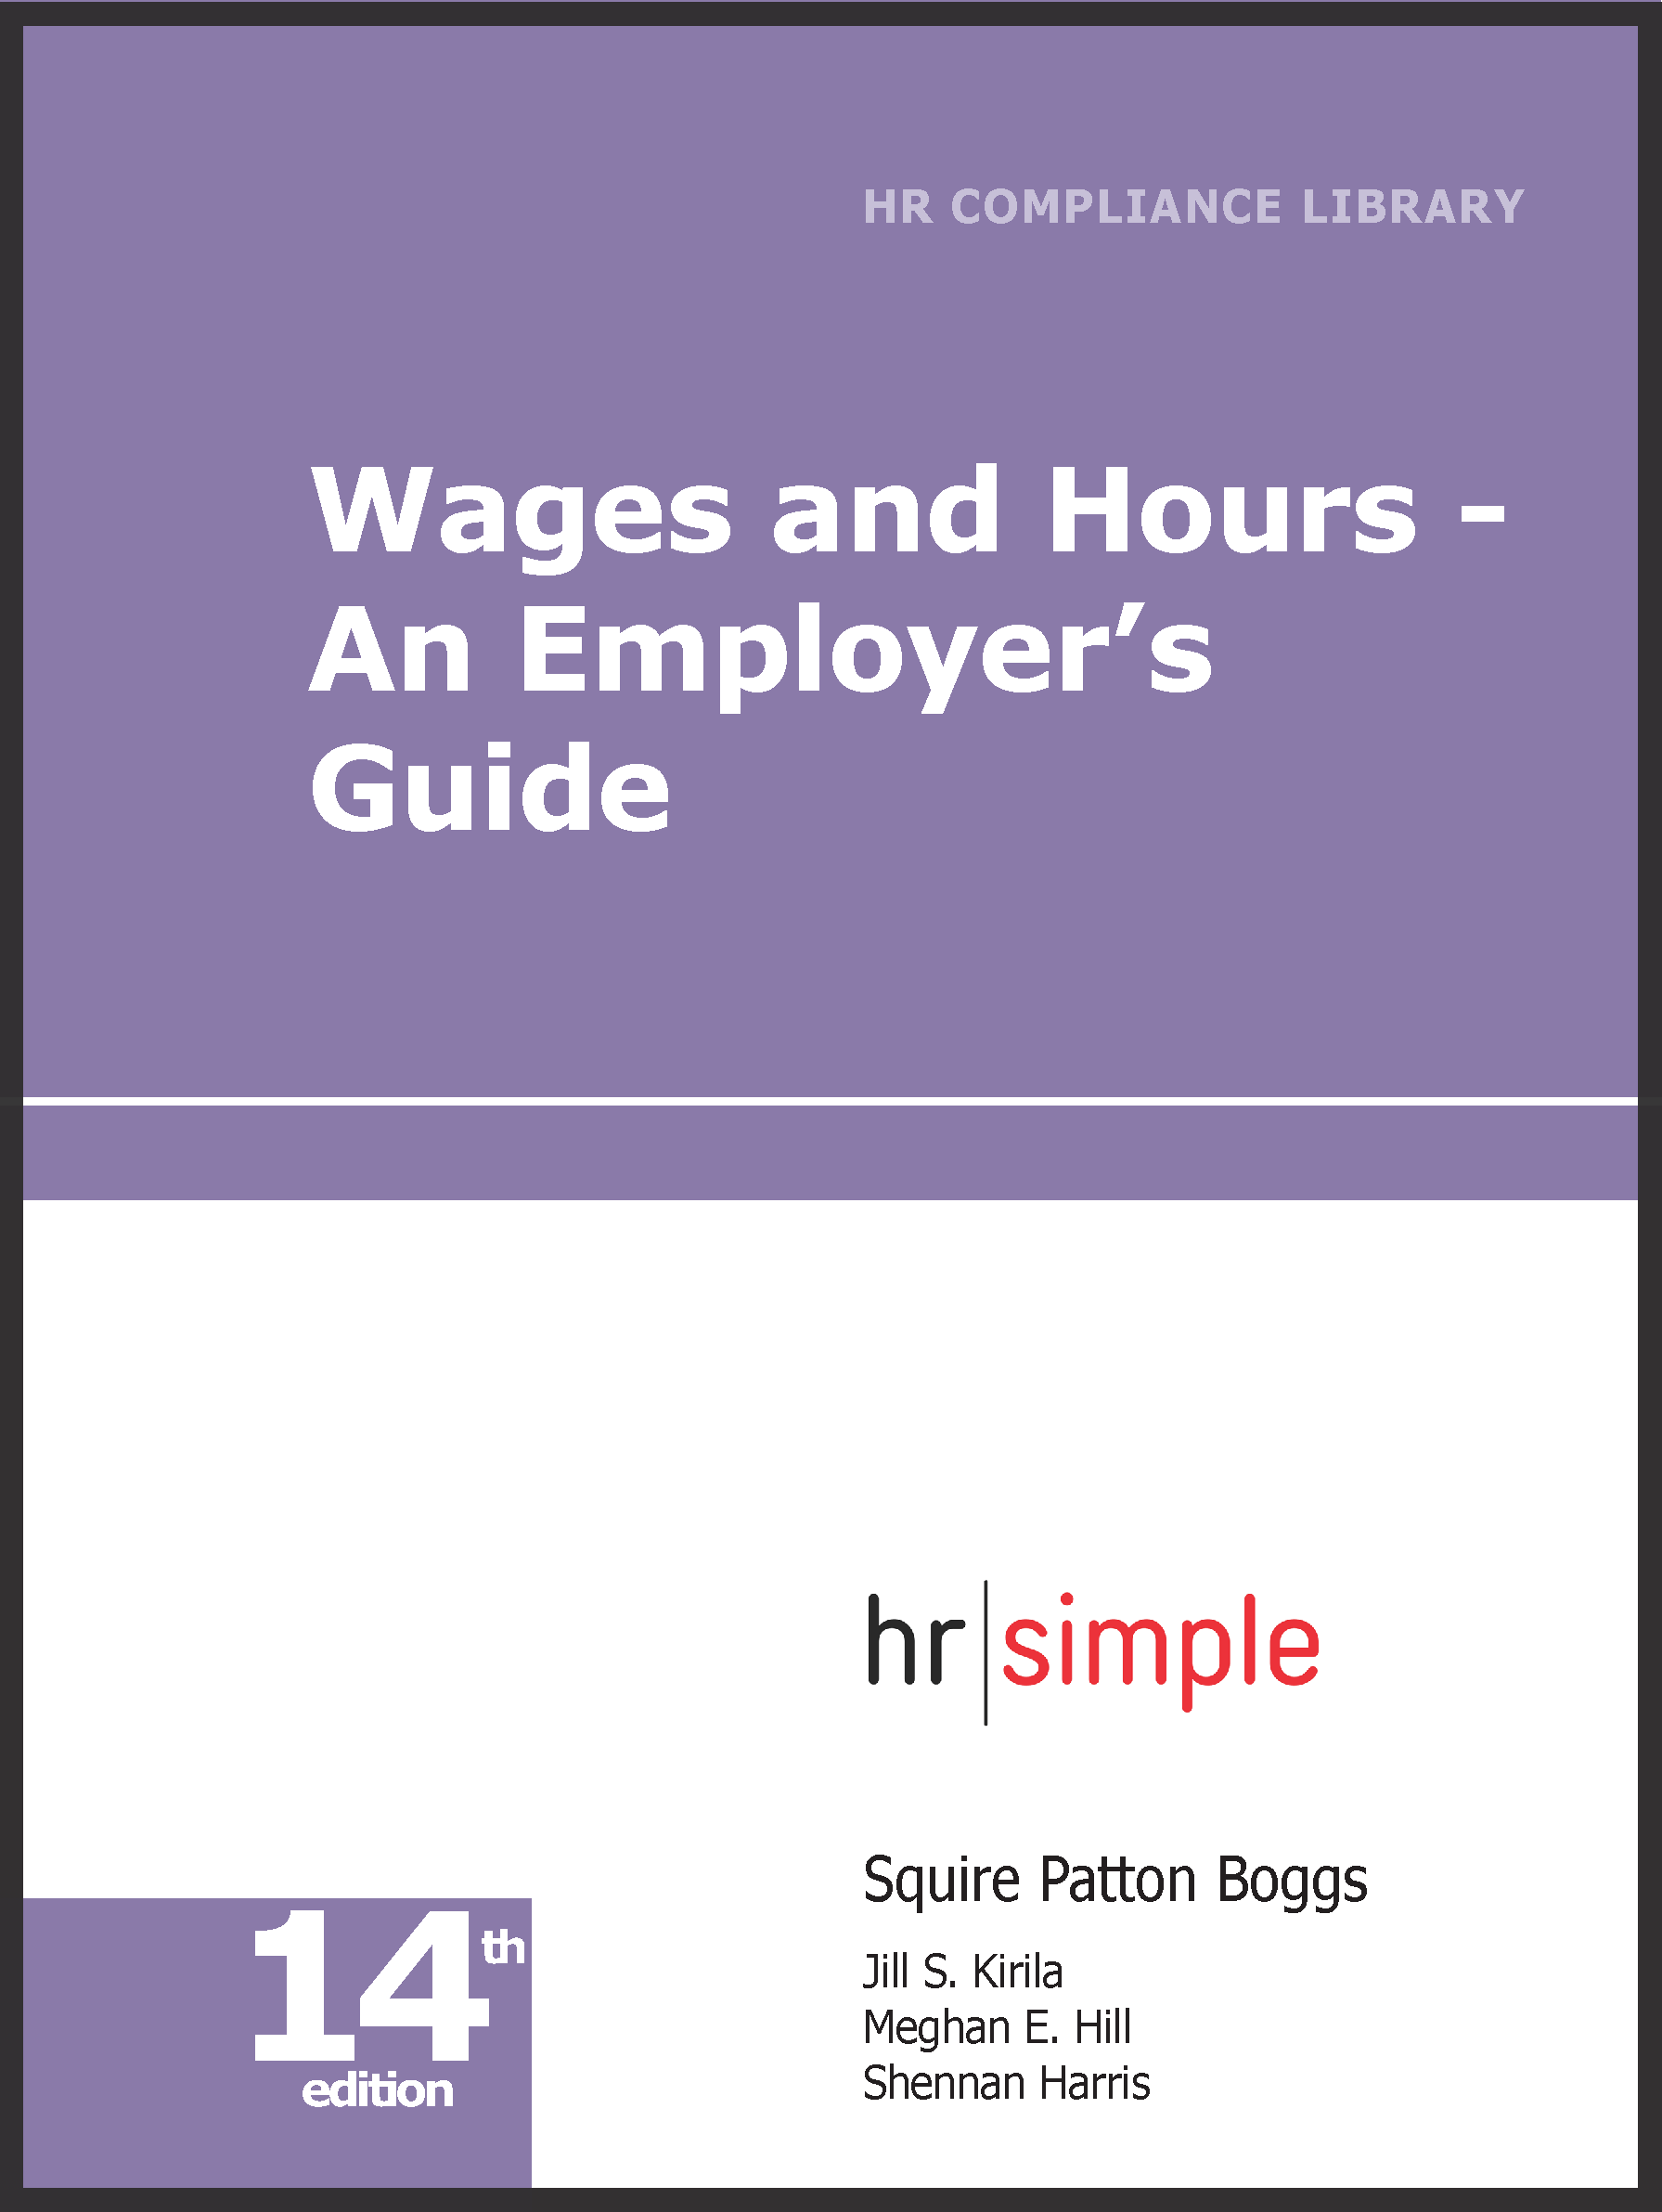 Wages and Hours — An Employer's Guide employment law image, remote work, labor laws, employment laws, right to work, order of protection, minimum wage